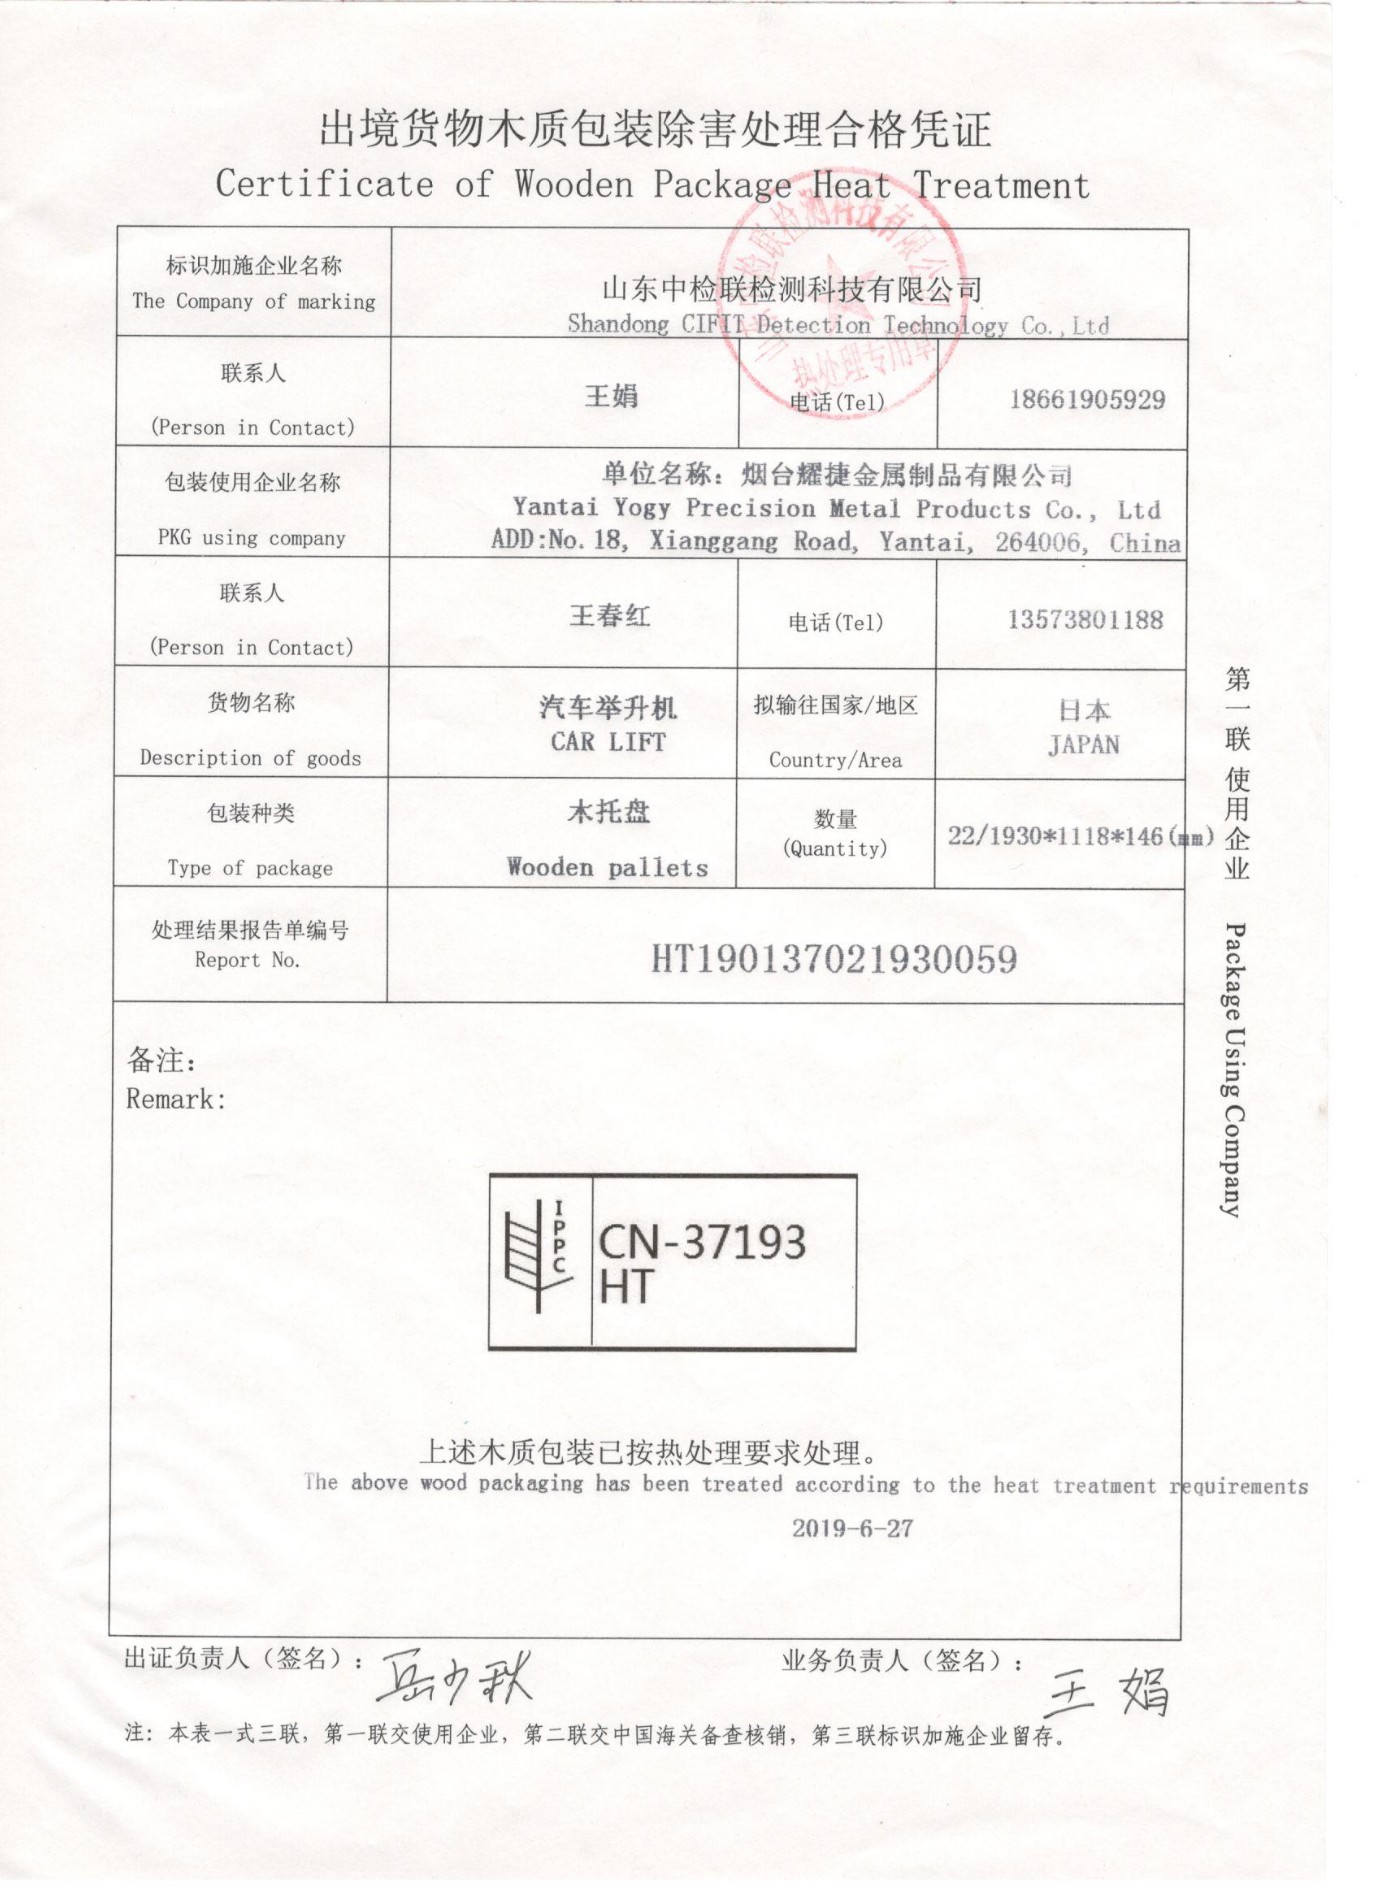 Certificate of Wooden Package Heat Treatment